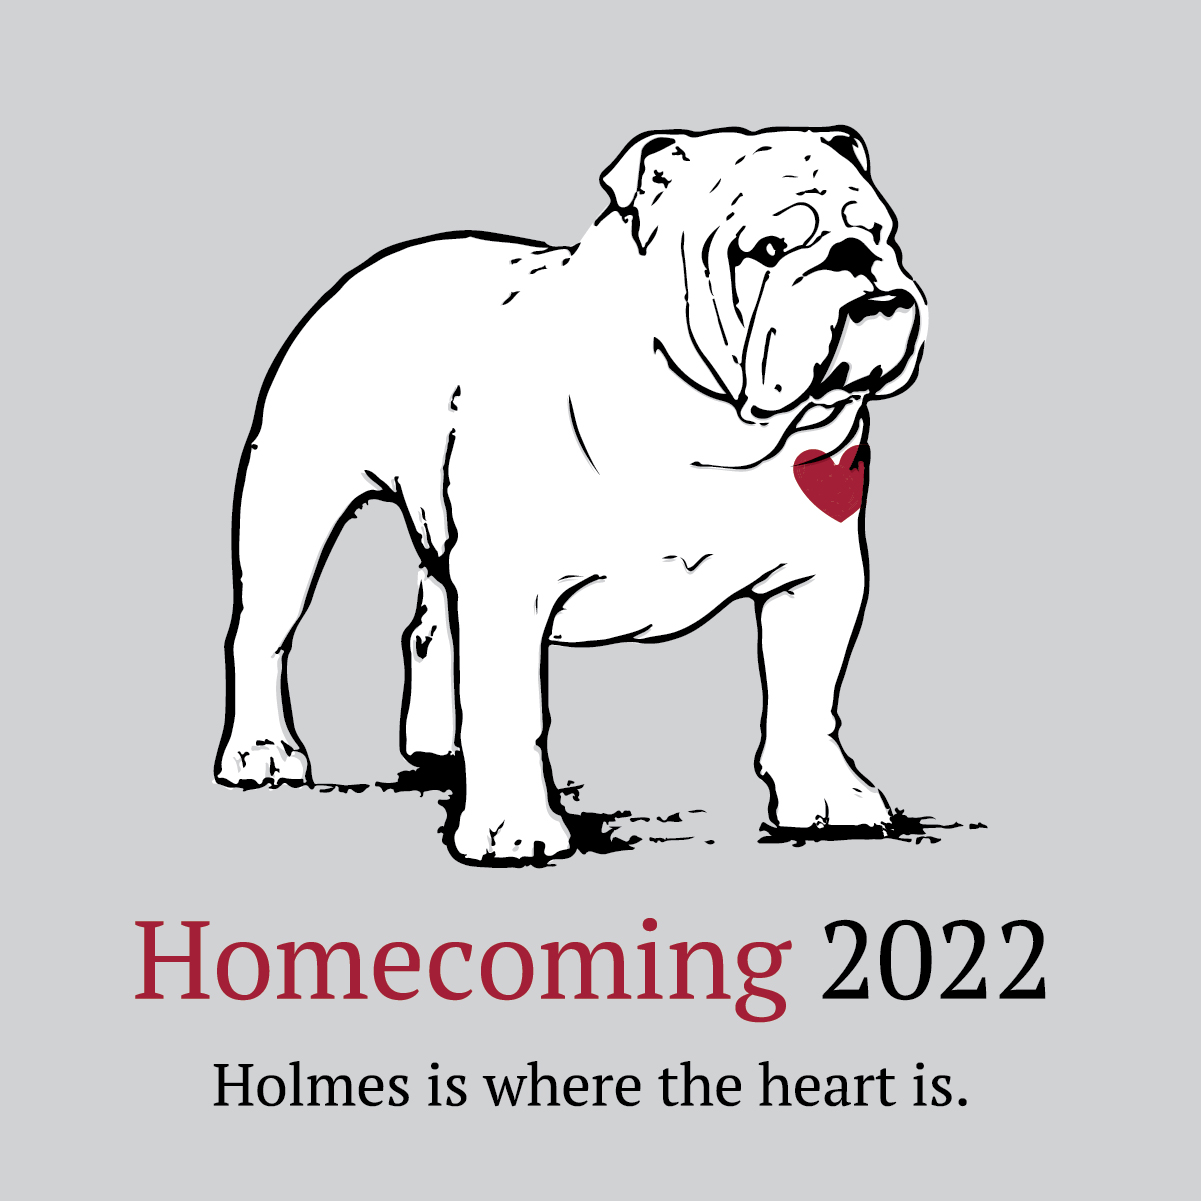 Homecoming set for Oct. 27 on the Goodman Campus